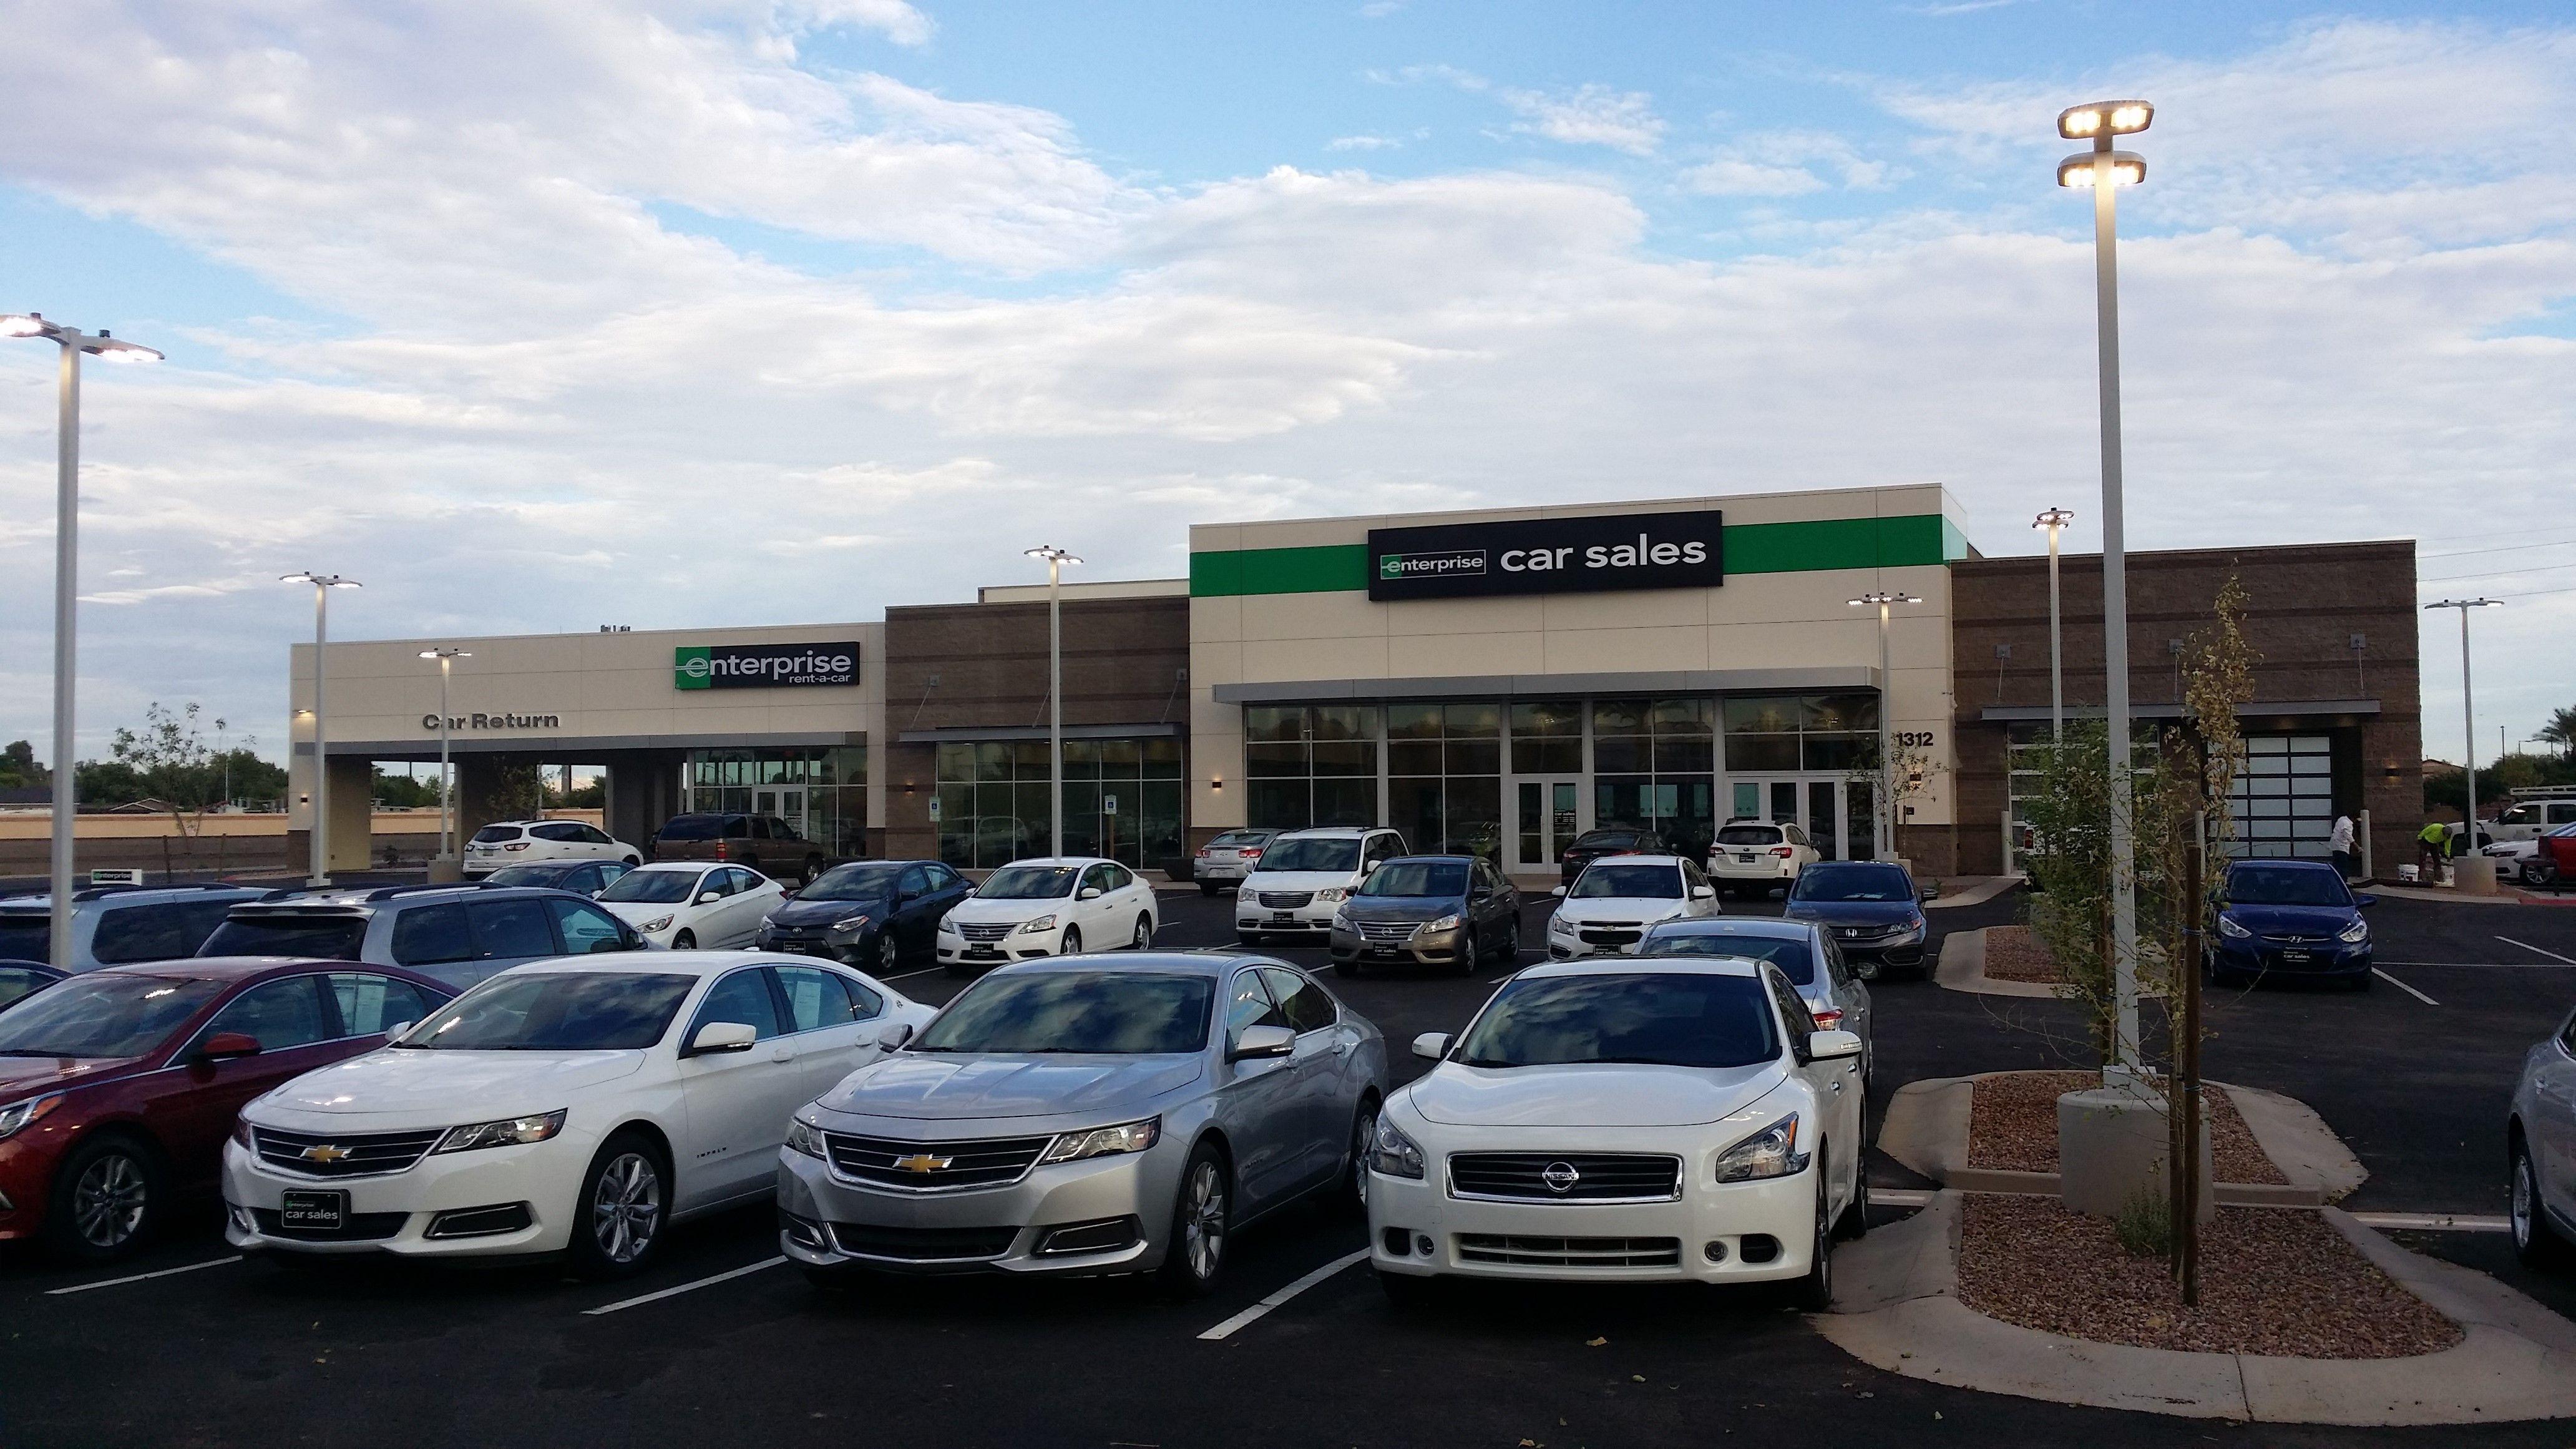 Enterprise Car Sales Logo - Enterprise Car Sales Expanding Nationwide, Two New Locations